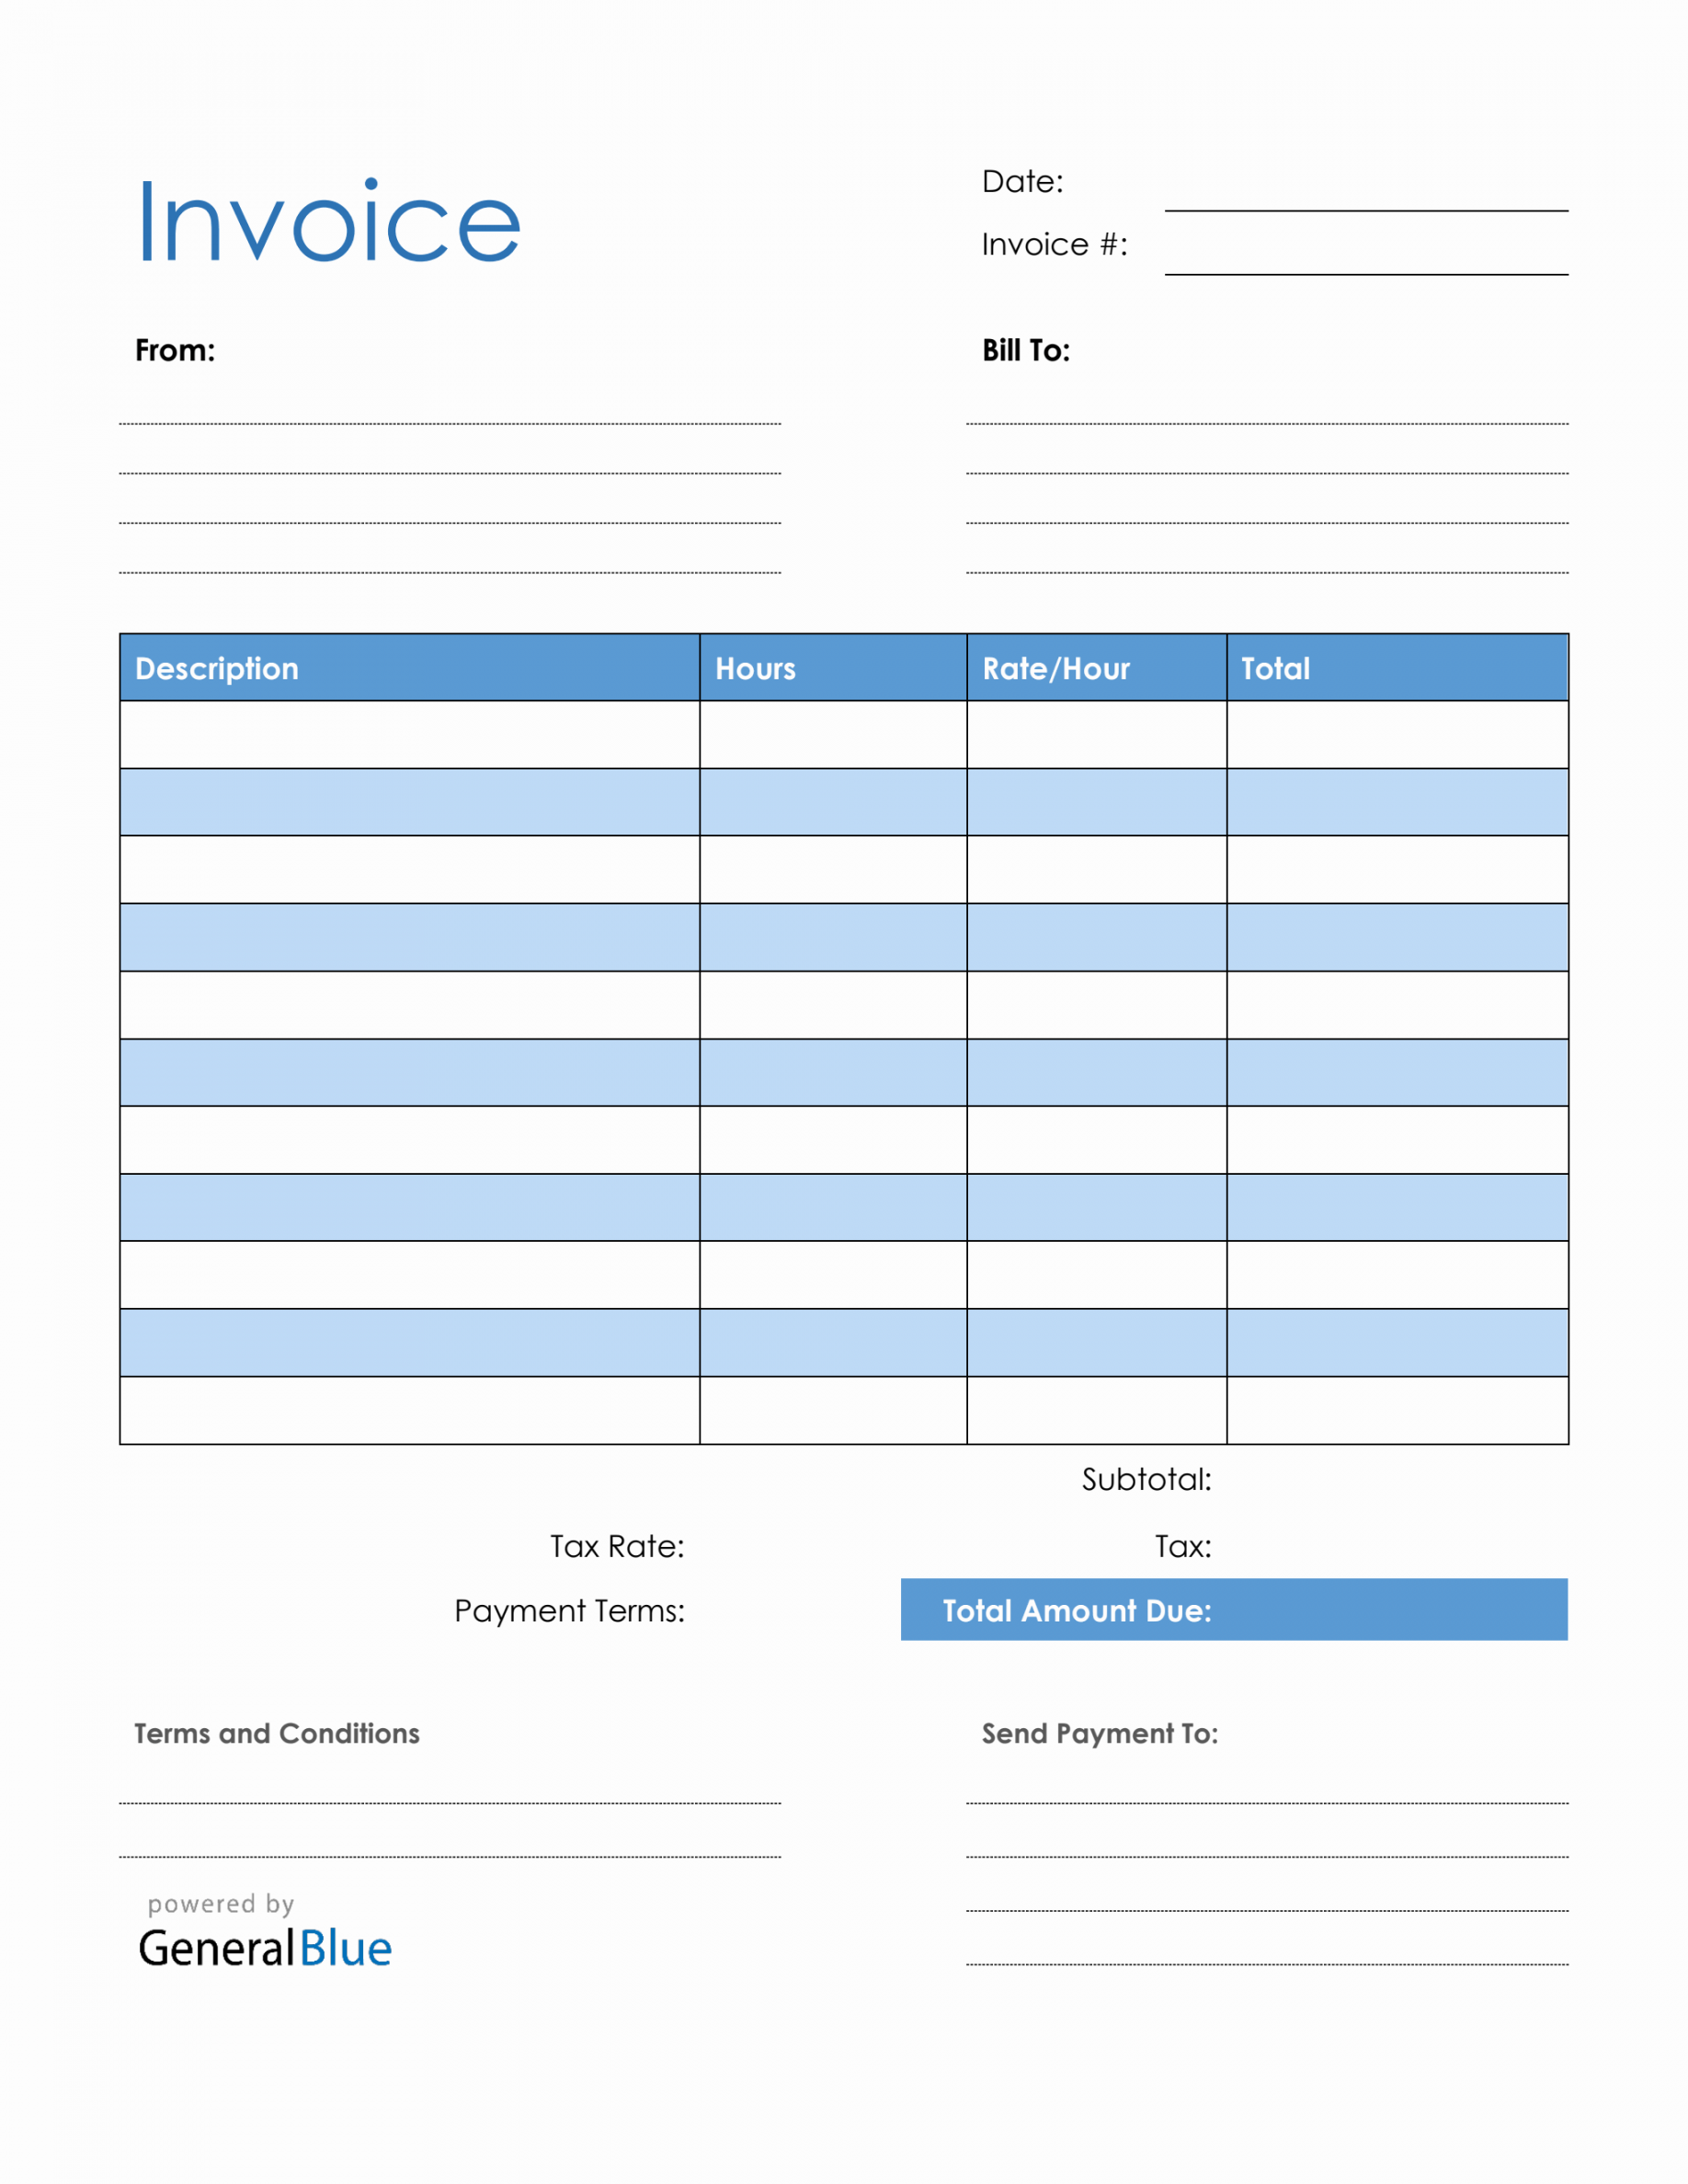 Free Printable Invoice Template - Printable - Blank Invoice Template in PDF Blue